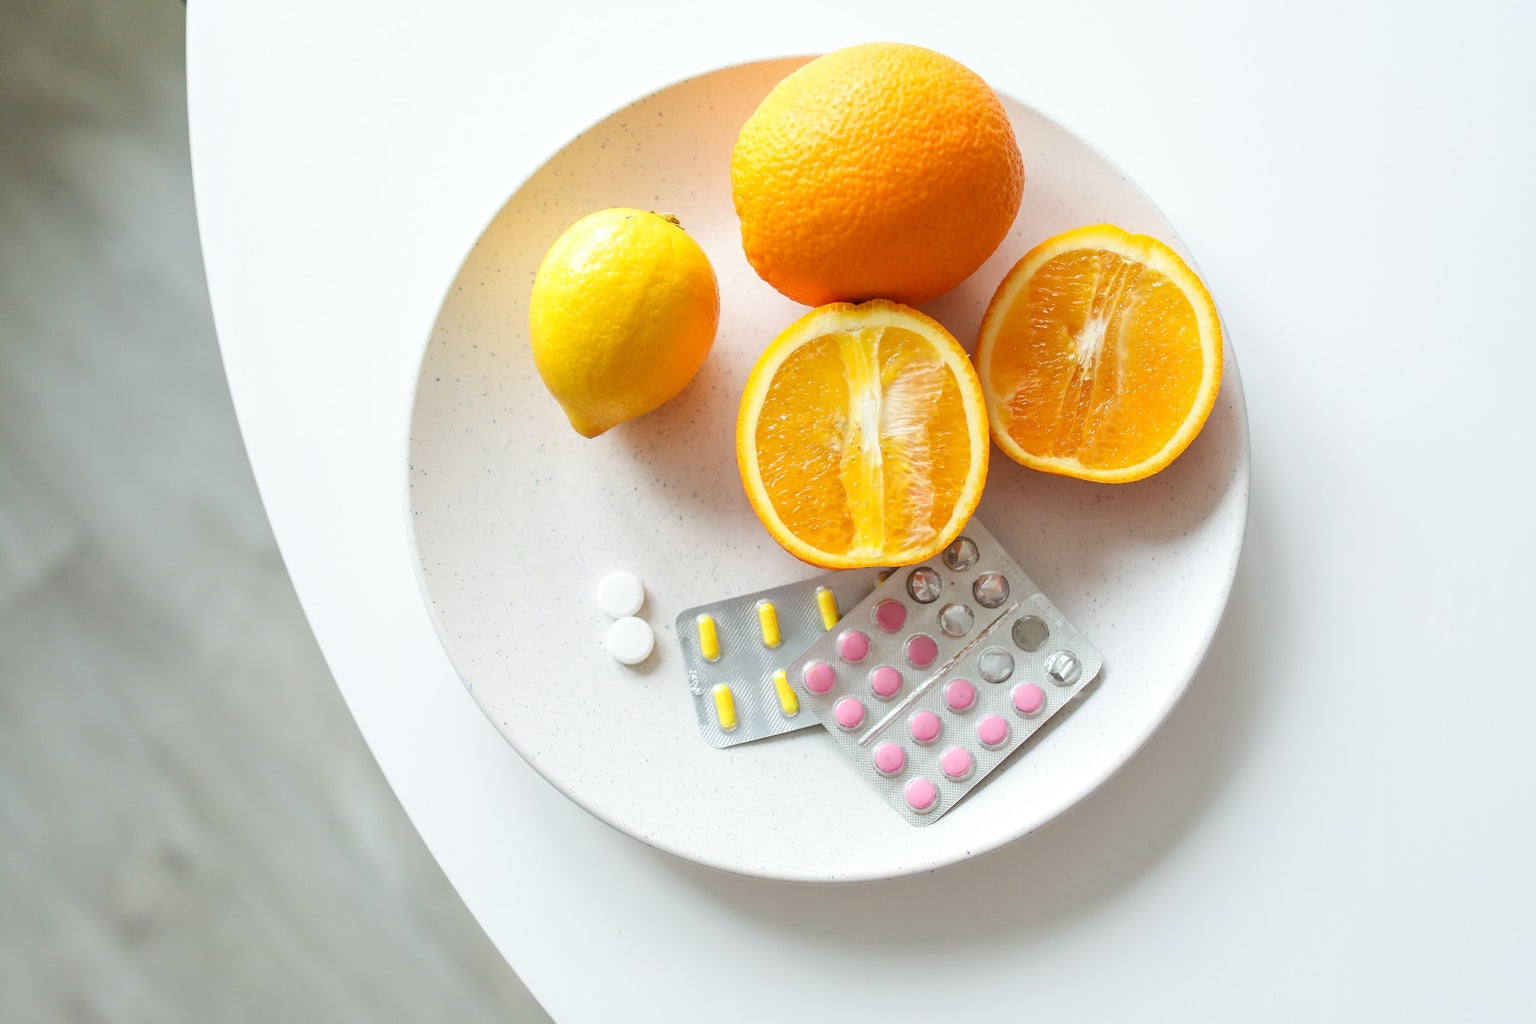 A white plate filled with oranges and pills